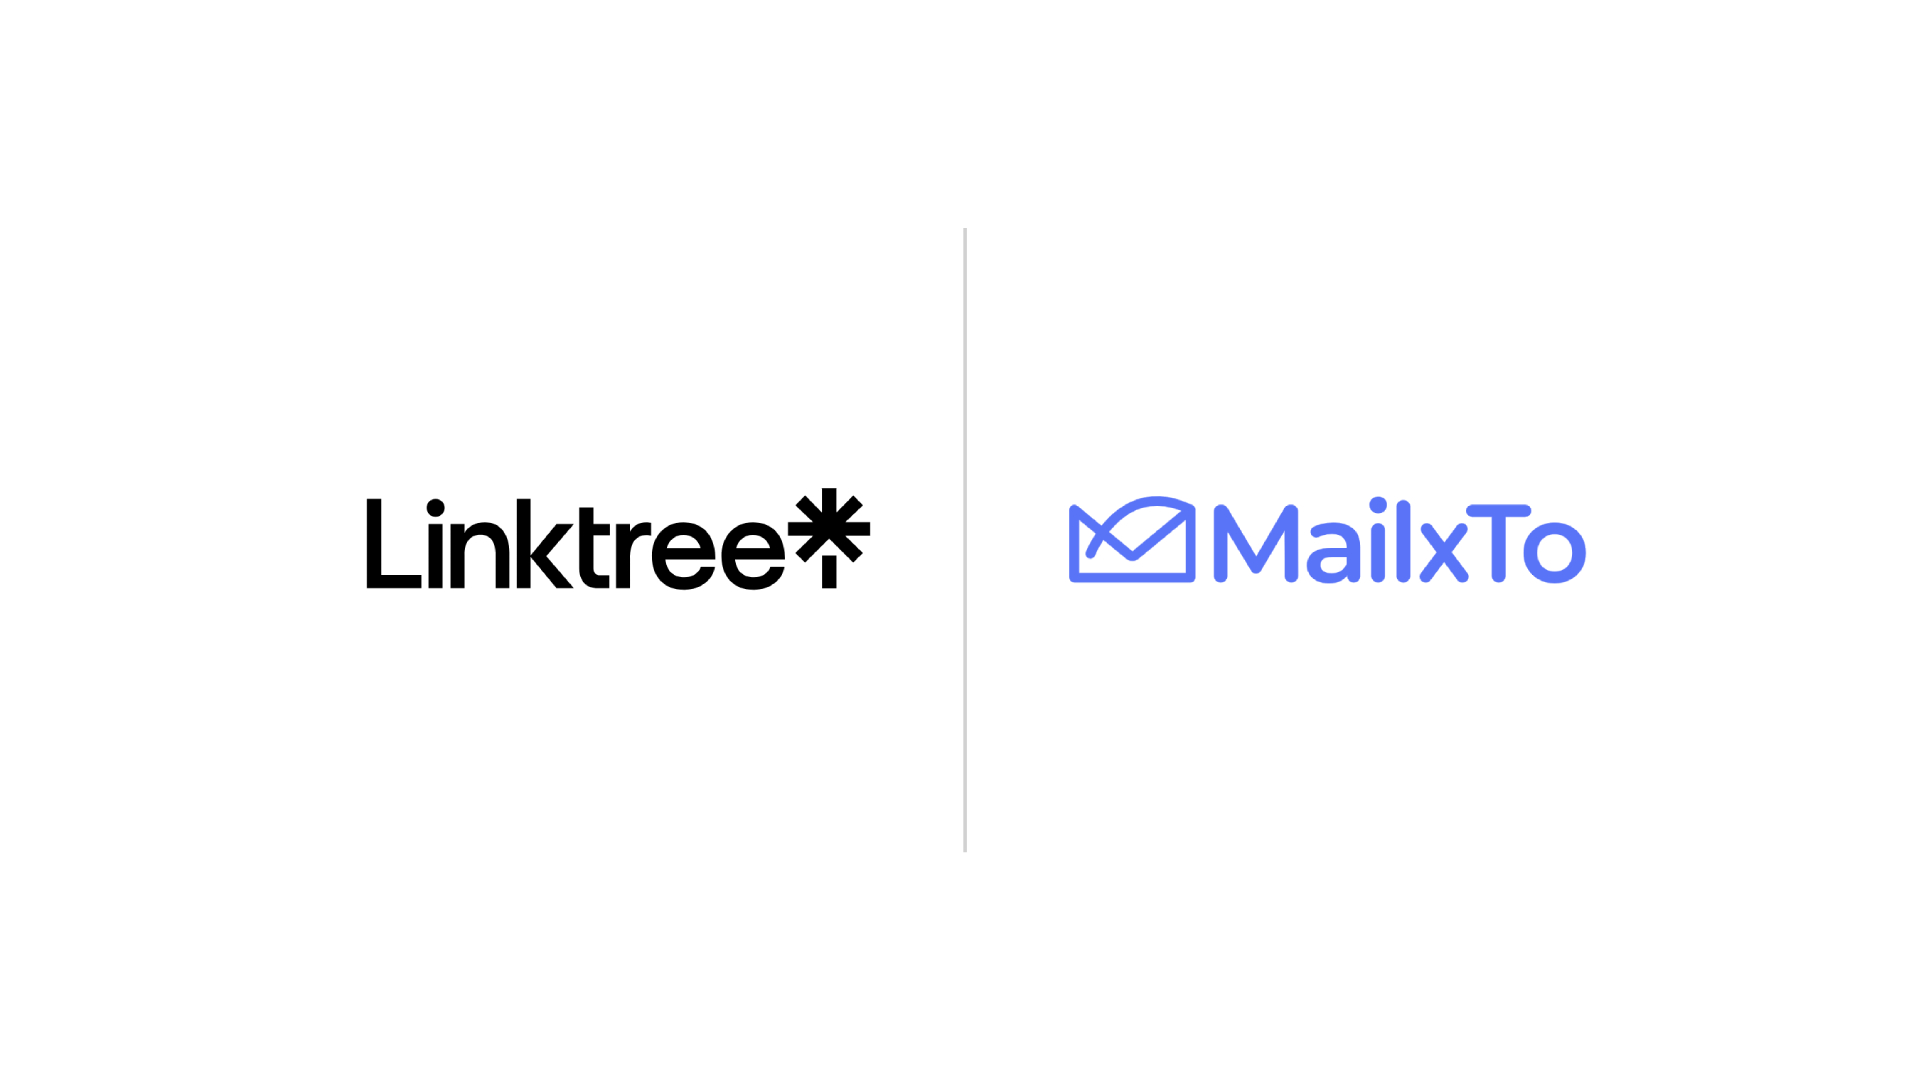 How to Add Mailto Links to Your Linktree with MailxTo?